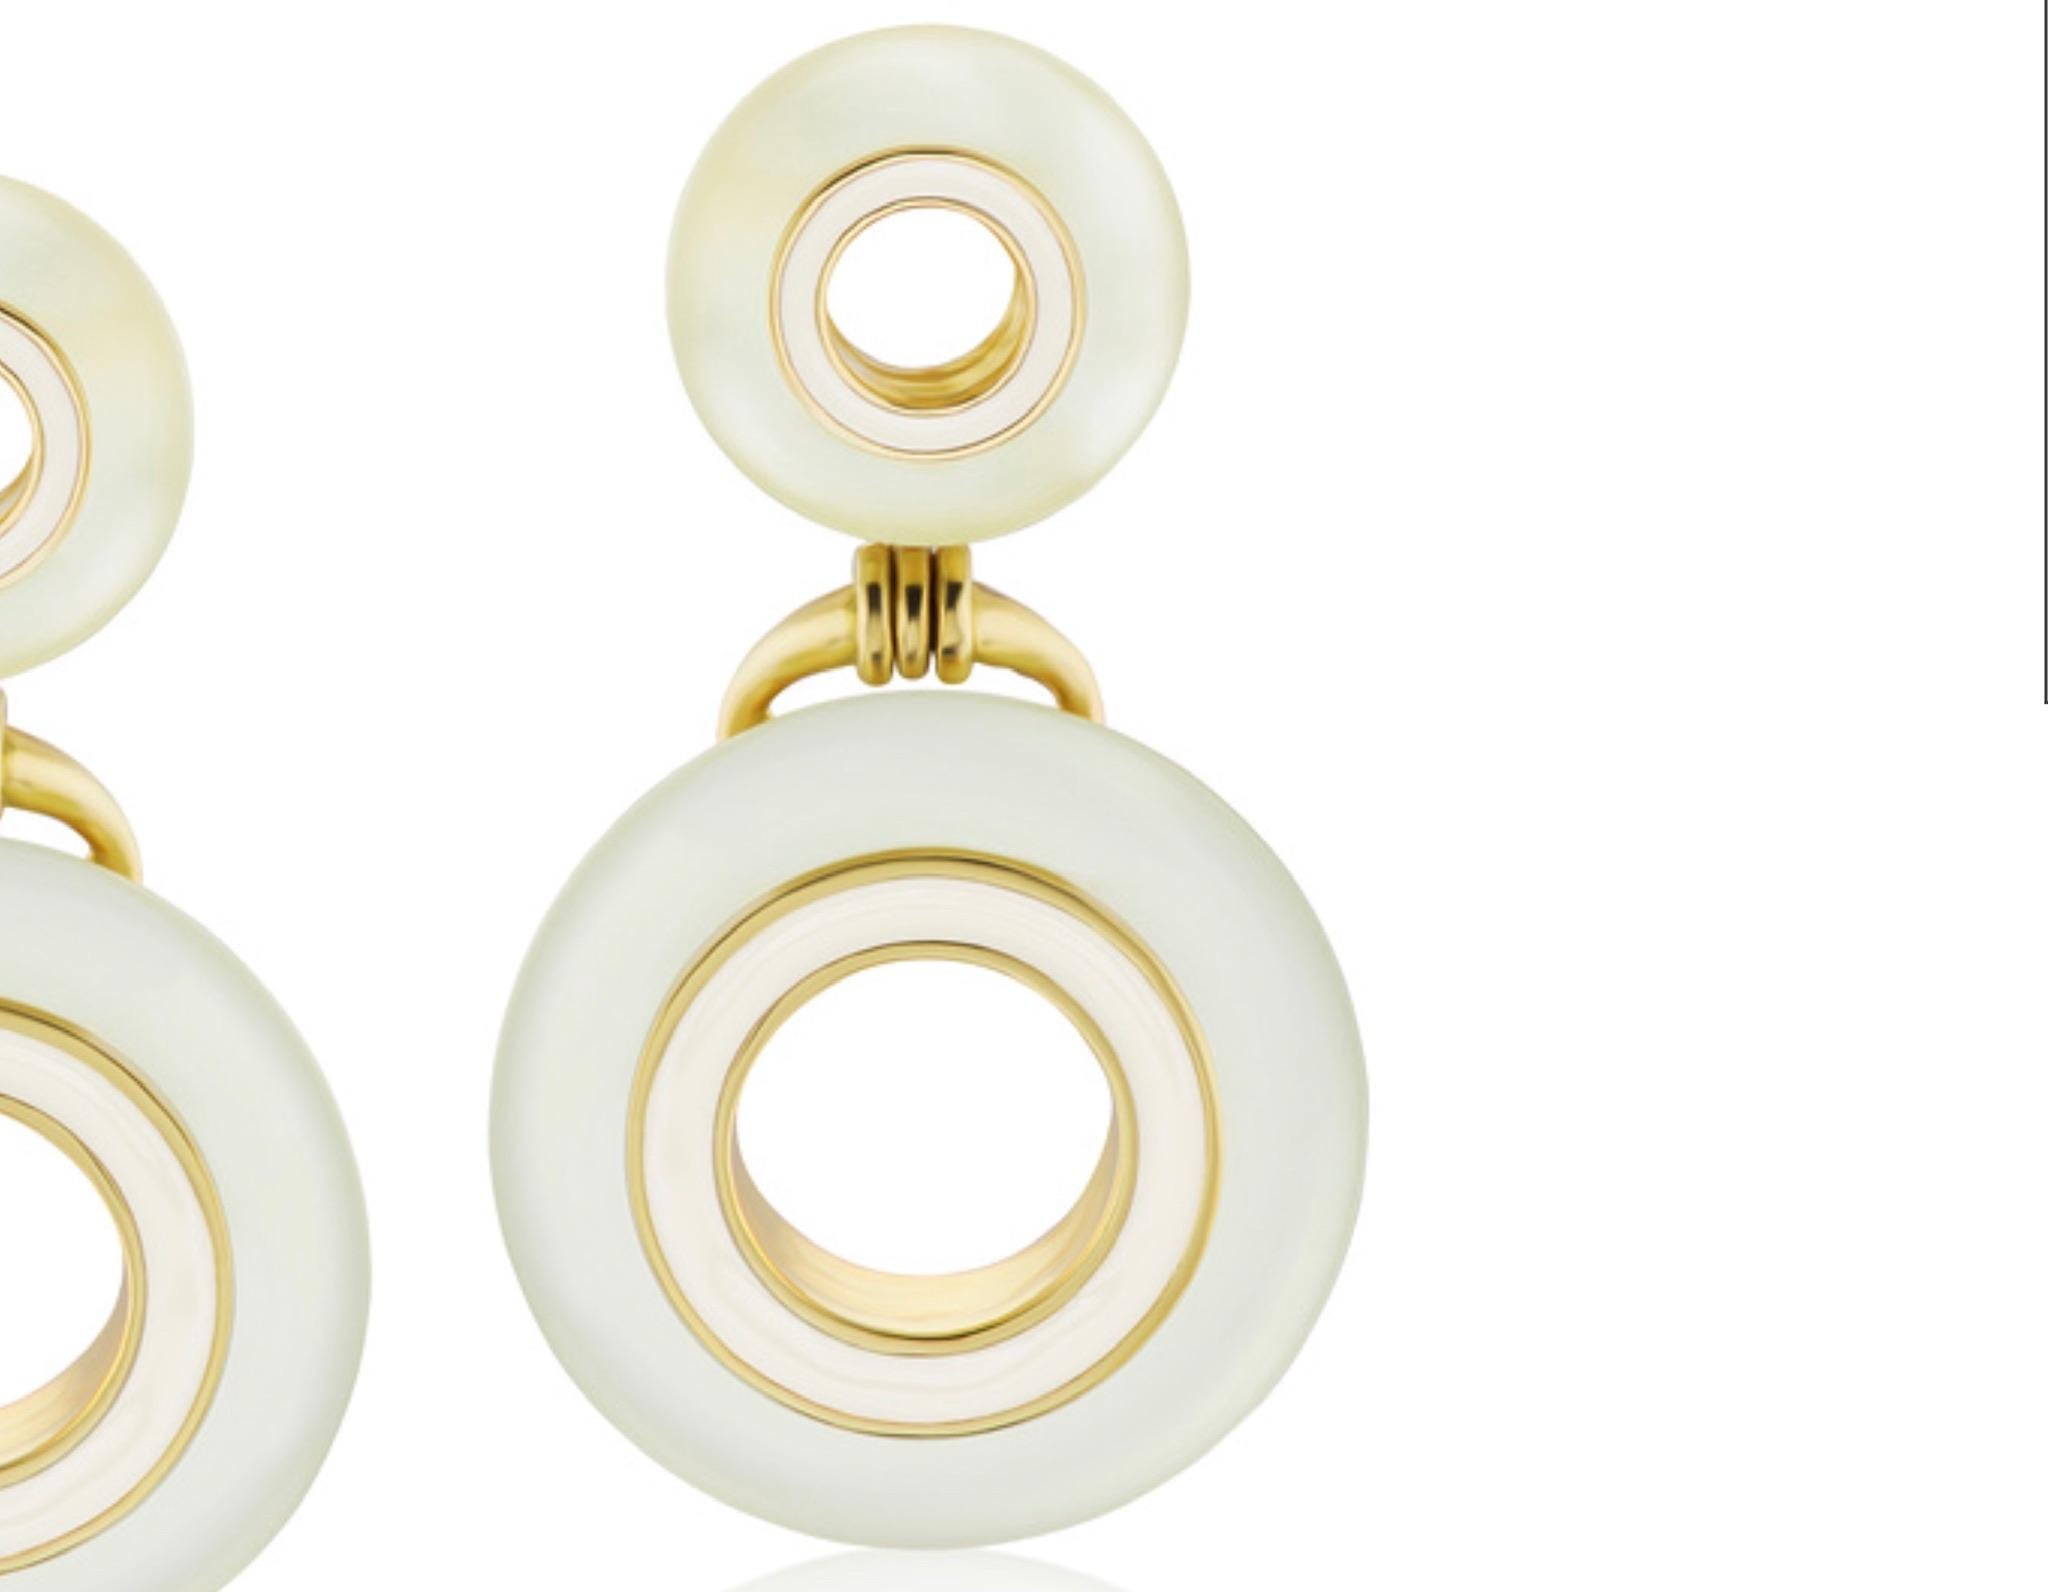 These Andrew Glassford earrings are a second generation version of his 